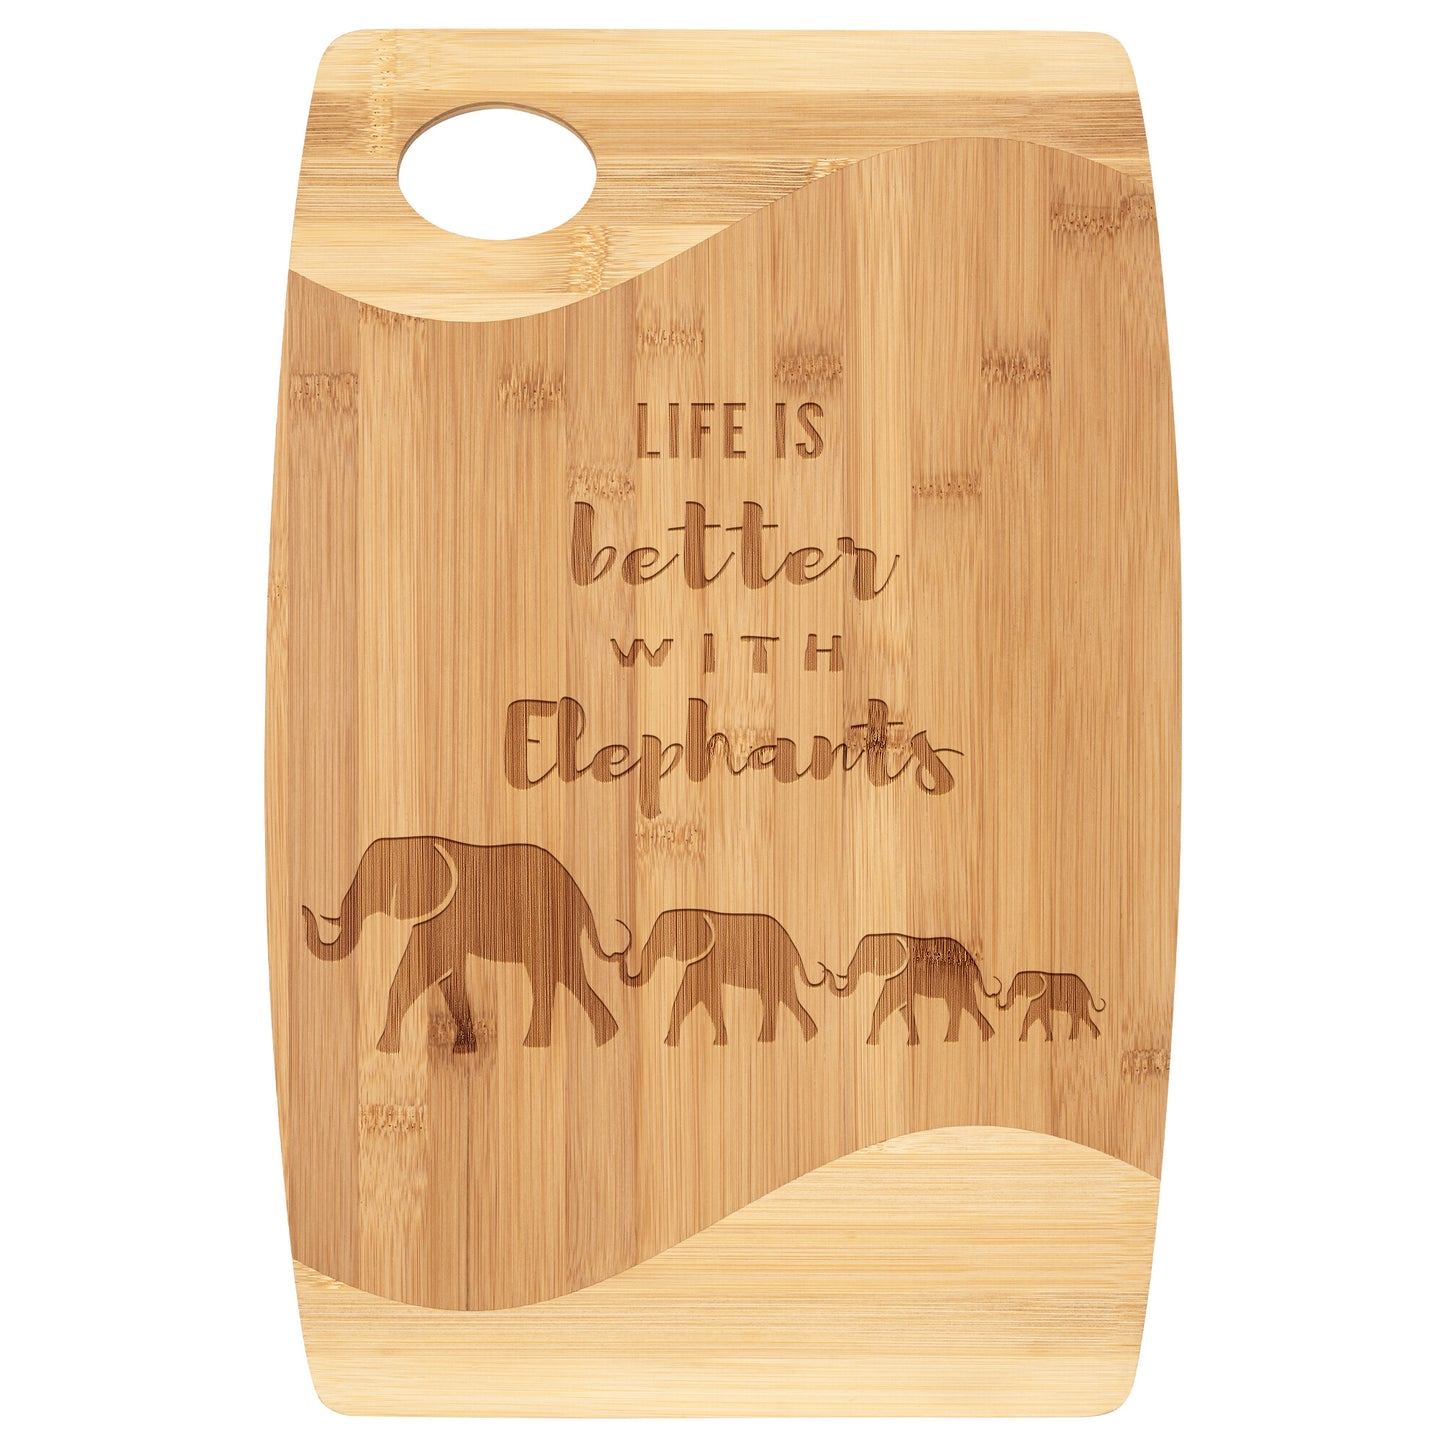 Rounded Rectangular Cutting Board with Elephants